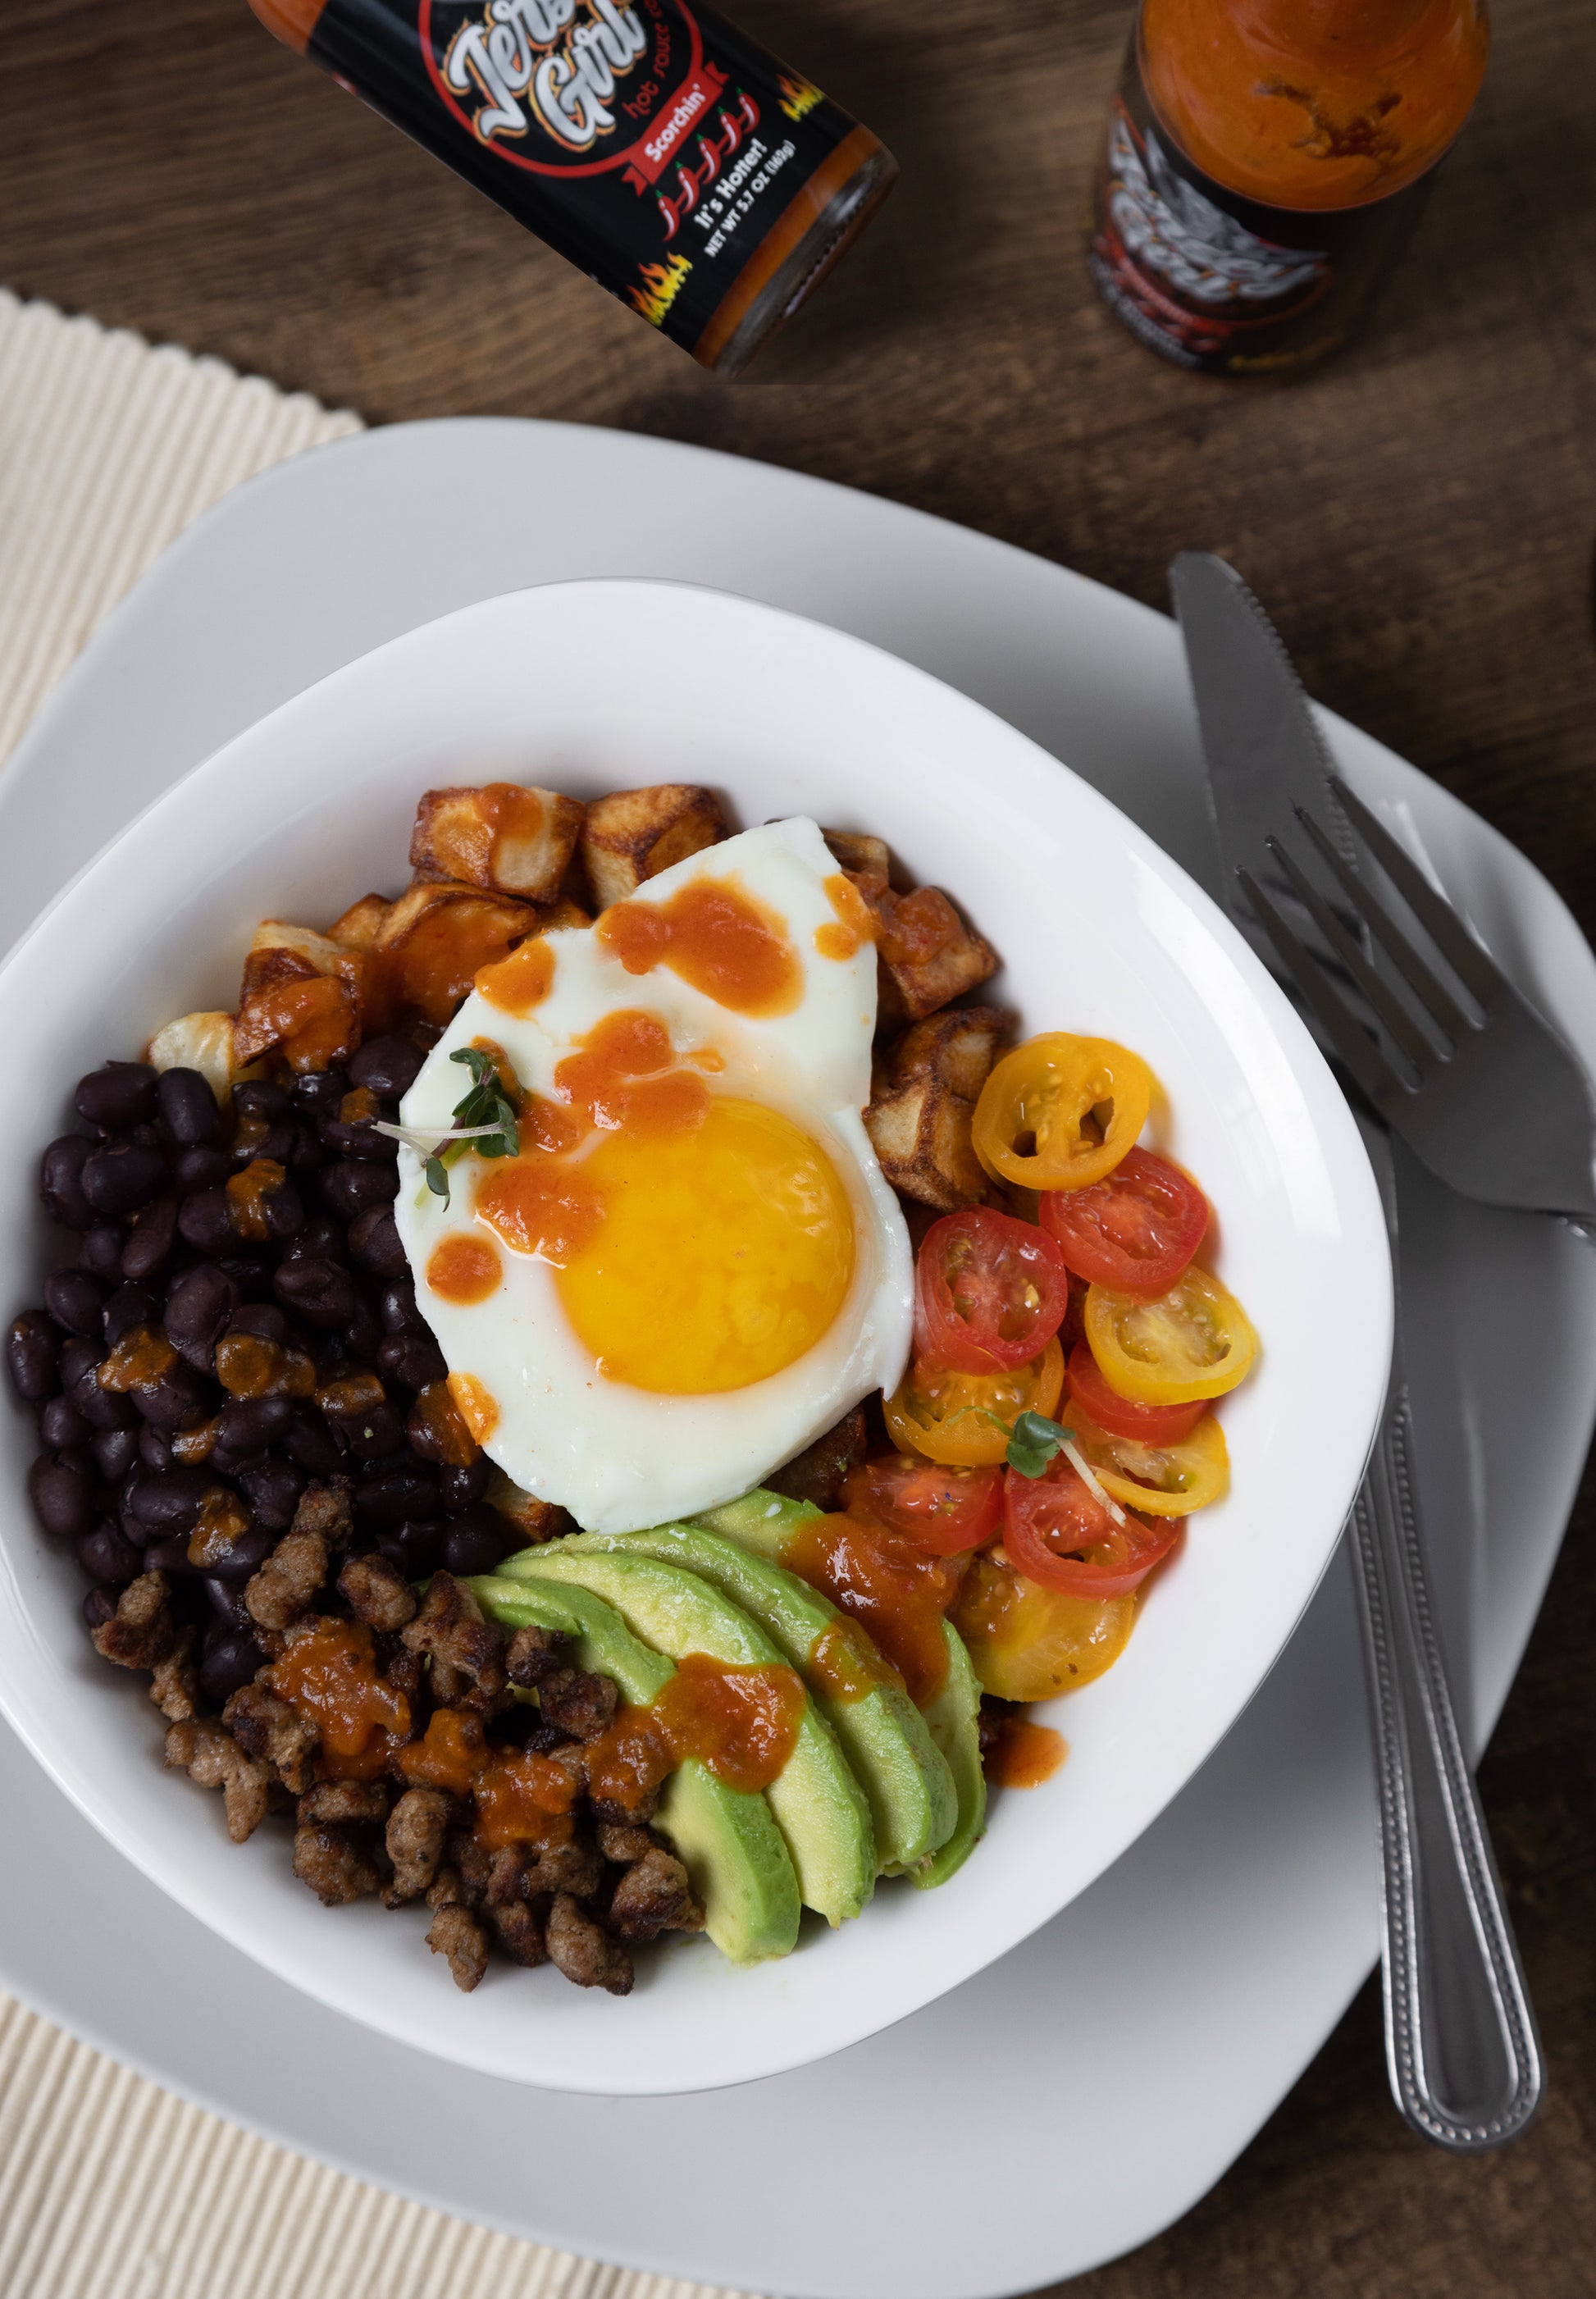 Jersey Girl Hot Sauce - Scorchin' shown on a bowl of Eggs, Beans, Sausage, tomatoes, and avacado